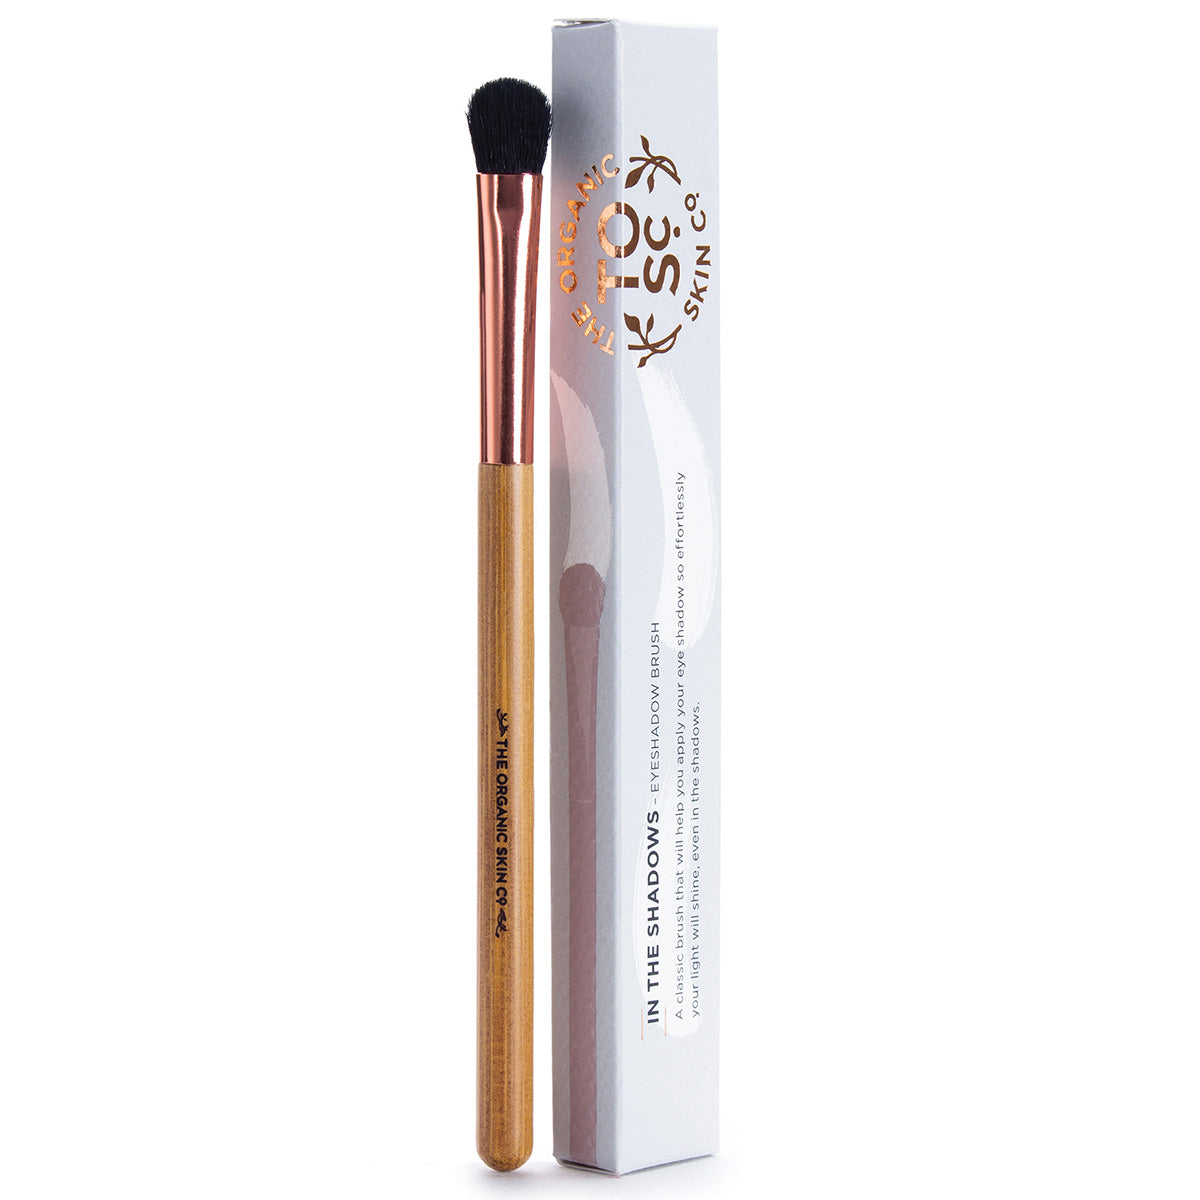 In The Shadows Makeup Brush